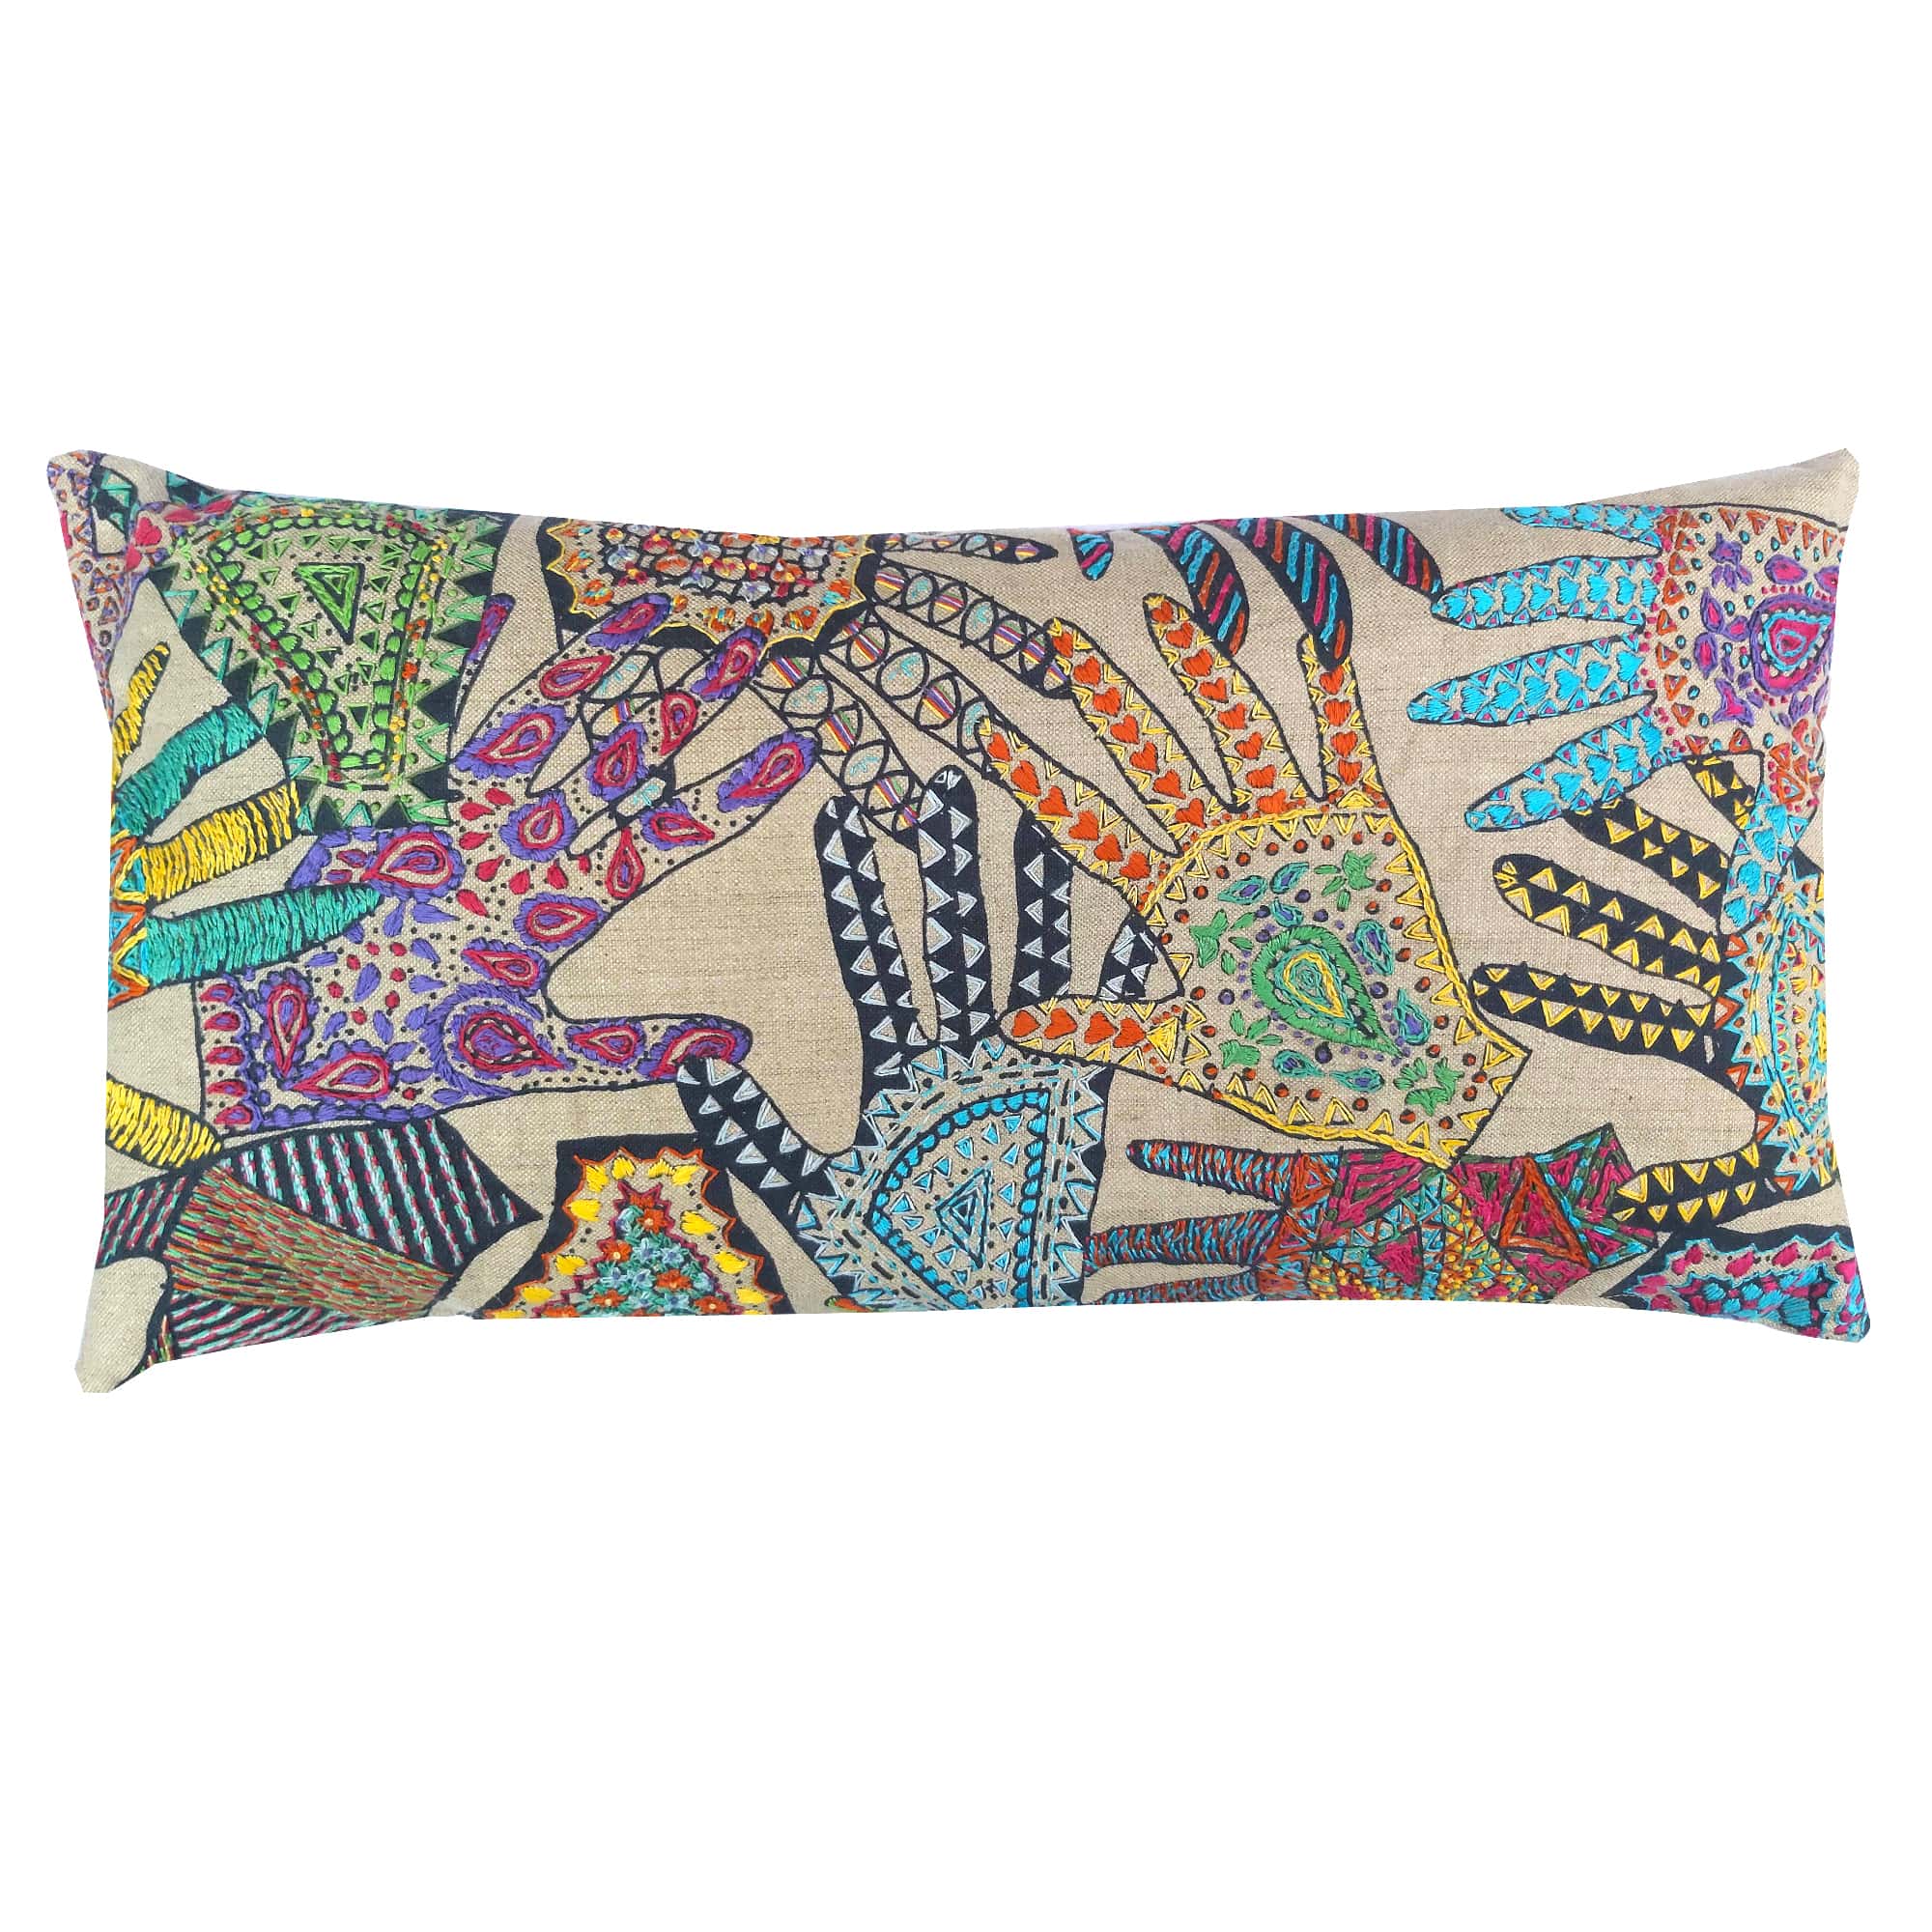 London College of Fashion Embroidered Hands Cushion Bright